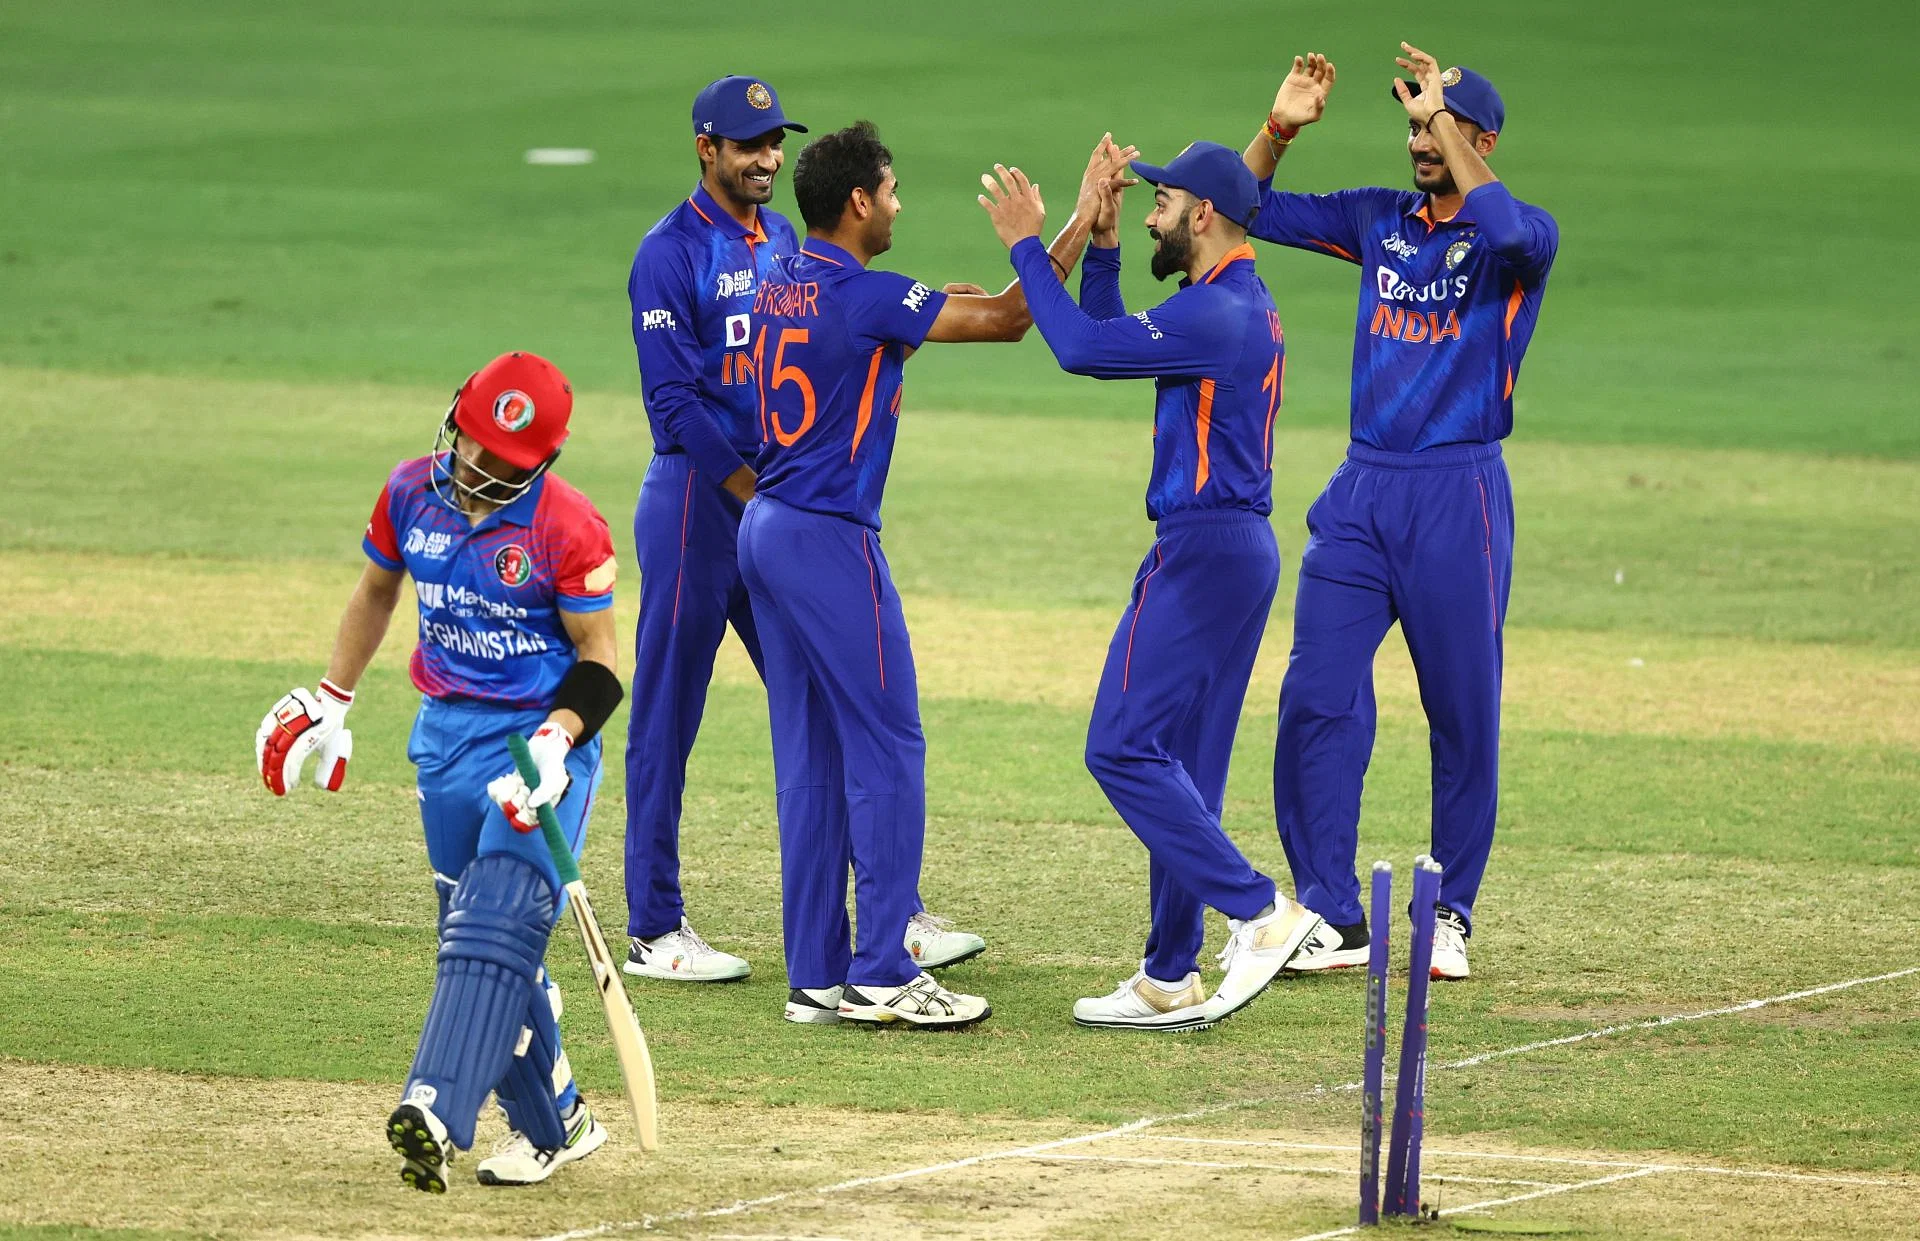 India vs Afghanistan 2nd T20I: Fantasy Tips, Predicted XI, Pitch Report